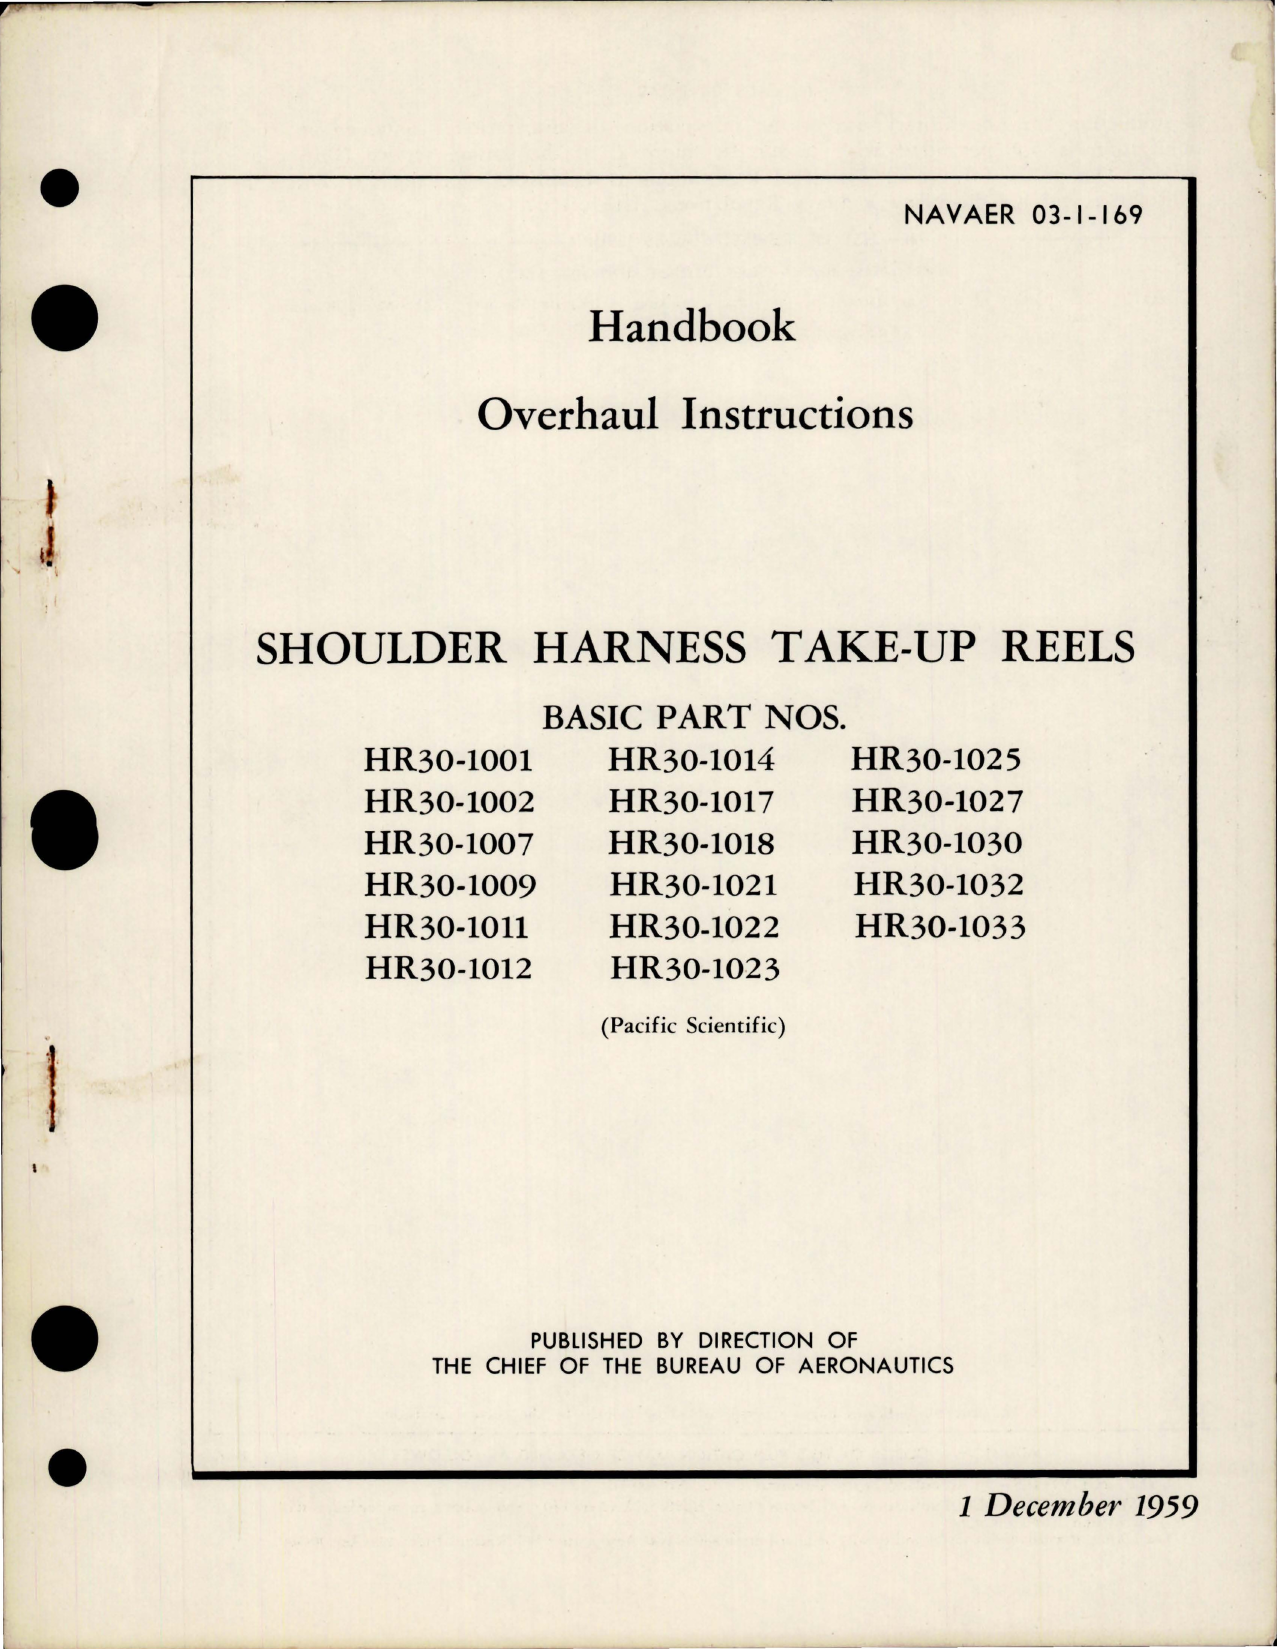 Sample page 1 from AirCorps Library document: Overhaul Instructions for Shoulder Harness Take-Up Reels